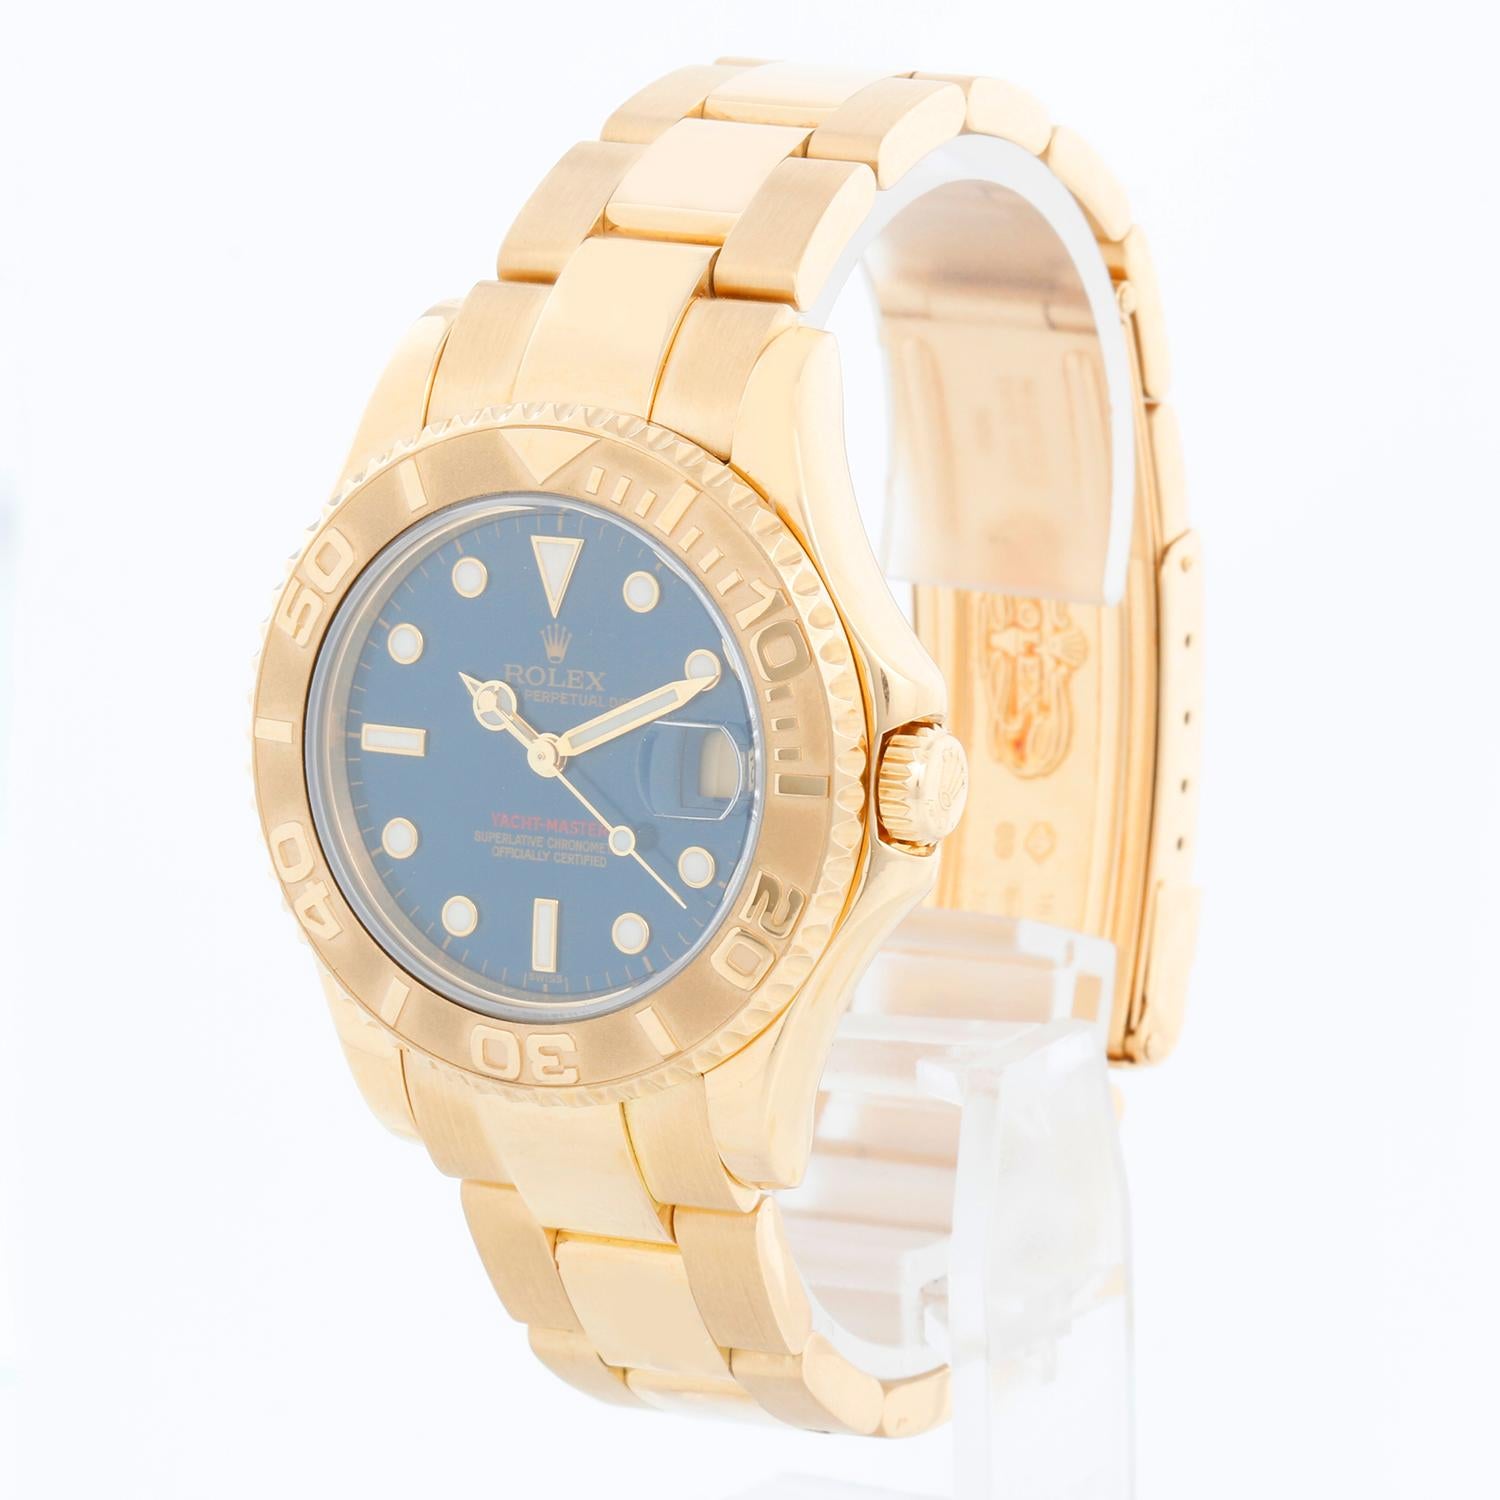 Rolex Yacht-Master Midsize Men's/Ladies 18k Gold Watch 68628 - Automatic winding, 29 jewels, sapphire crystal. 18k yellow gold case with rotating bezel (35mm diameter). Blue  dial with black hour markers. 18k yellow gold Oyster bracelet with